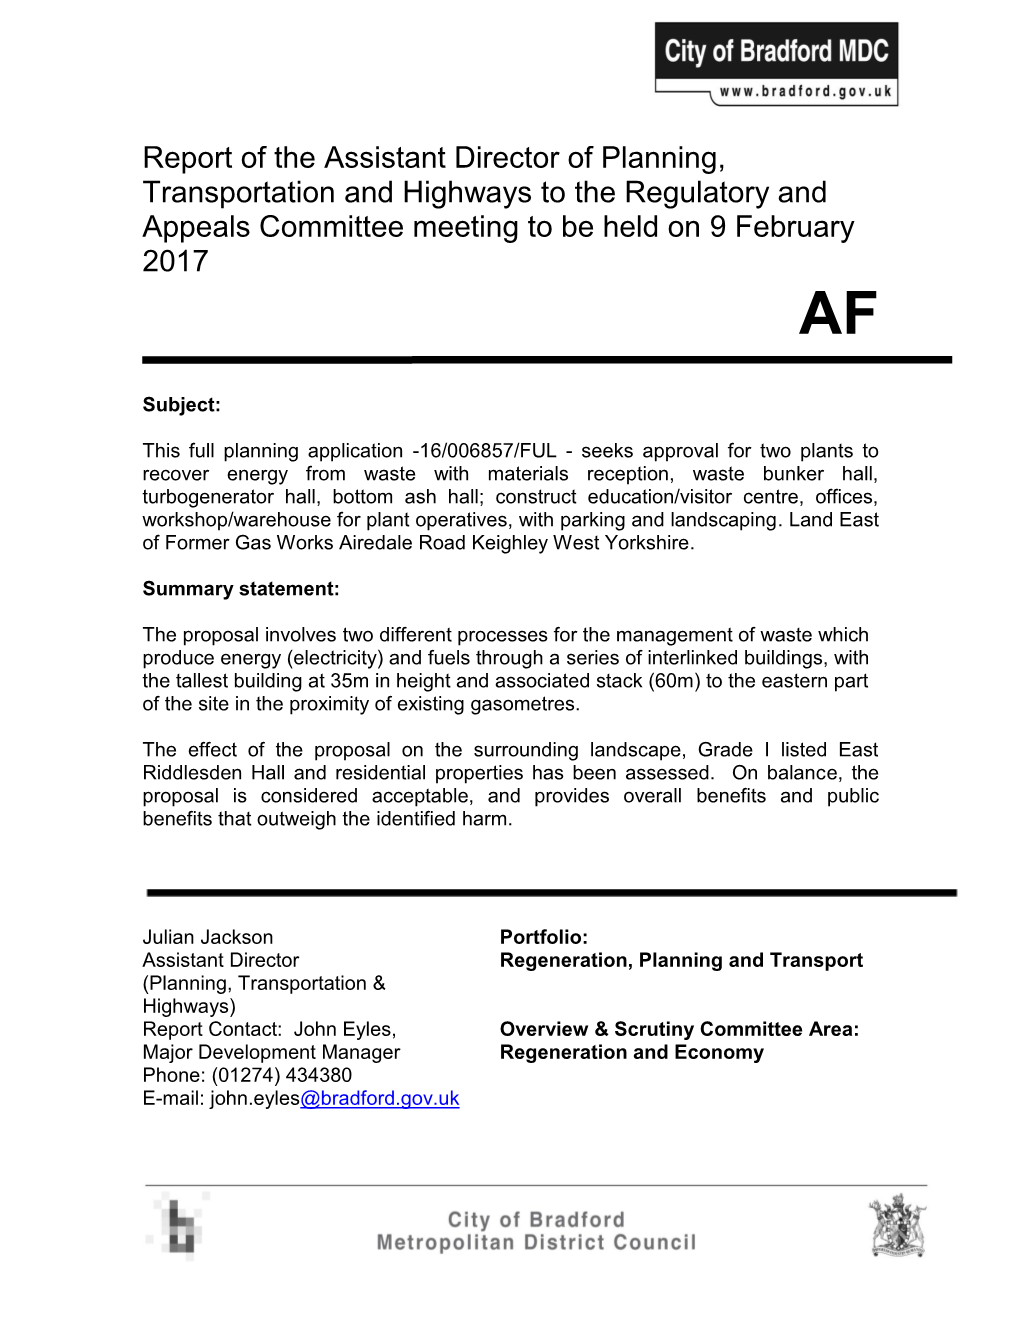 Report of the Assistant Director of Planning, Transportation and Highways to the Regulatory and Appeals Committee Meeting to Be Held on 9 February 2017 AF